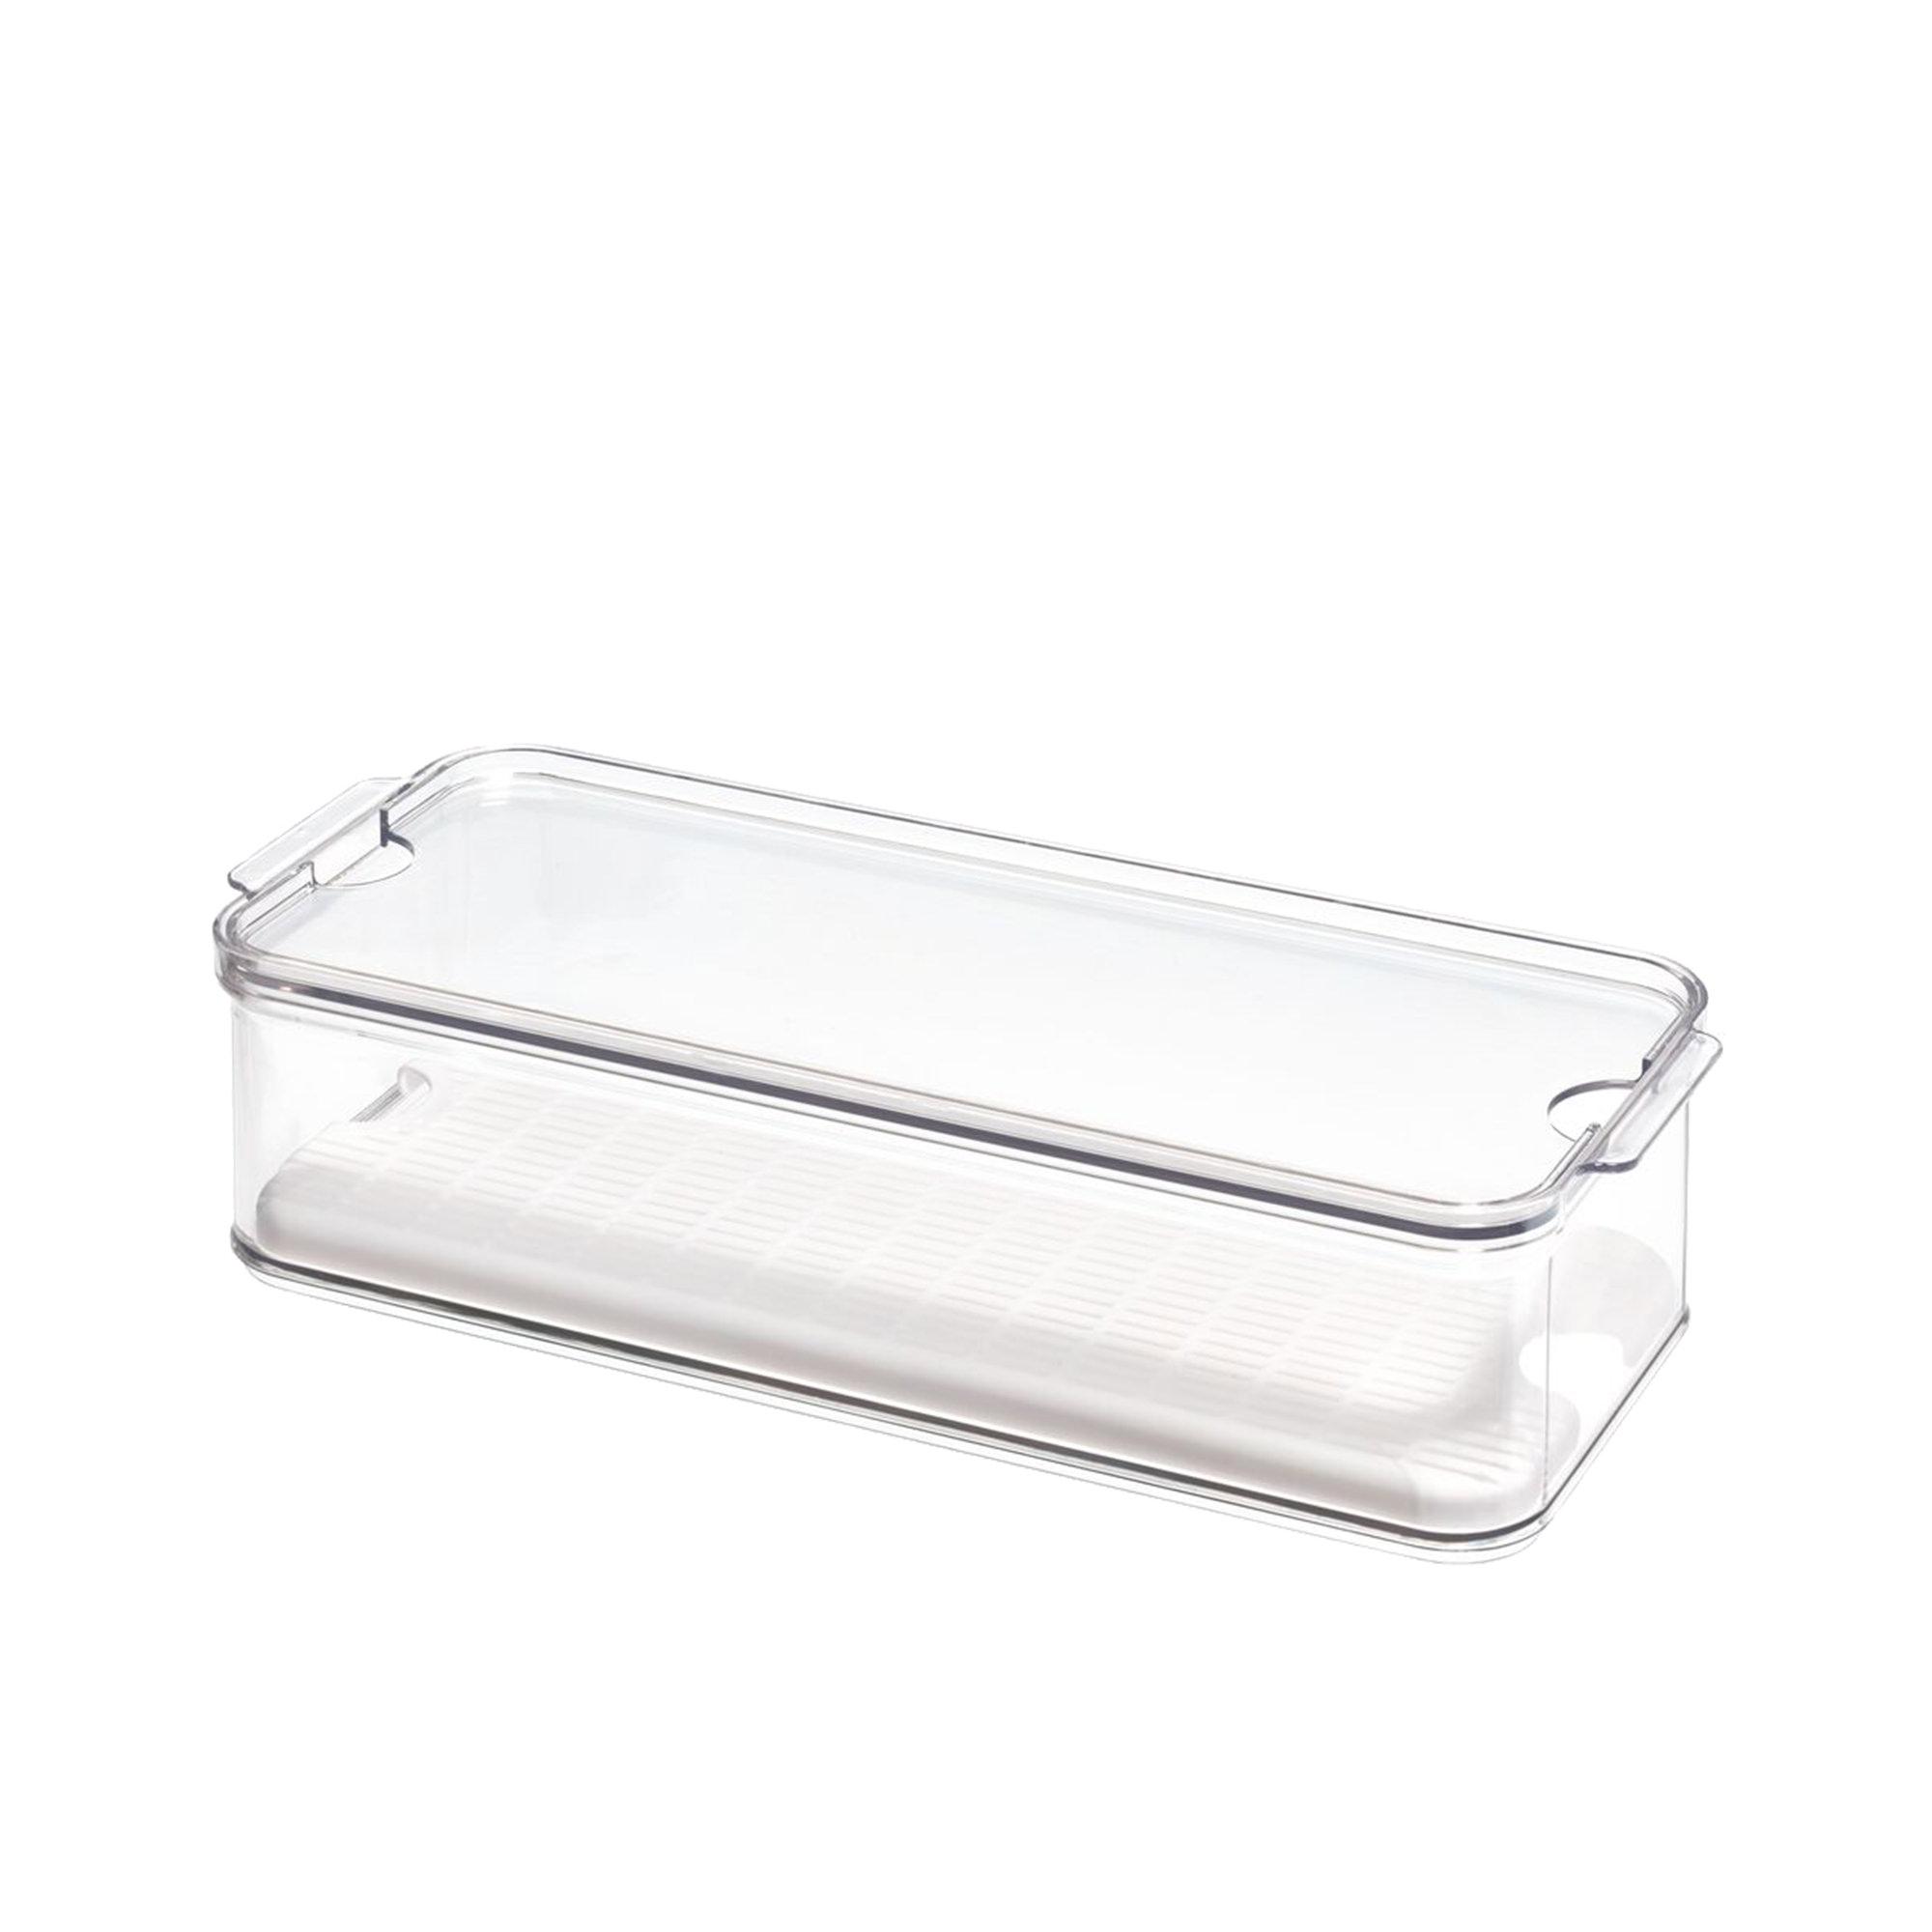 iDesign Crisp Produce Bin with Lid Clear Image 4